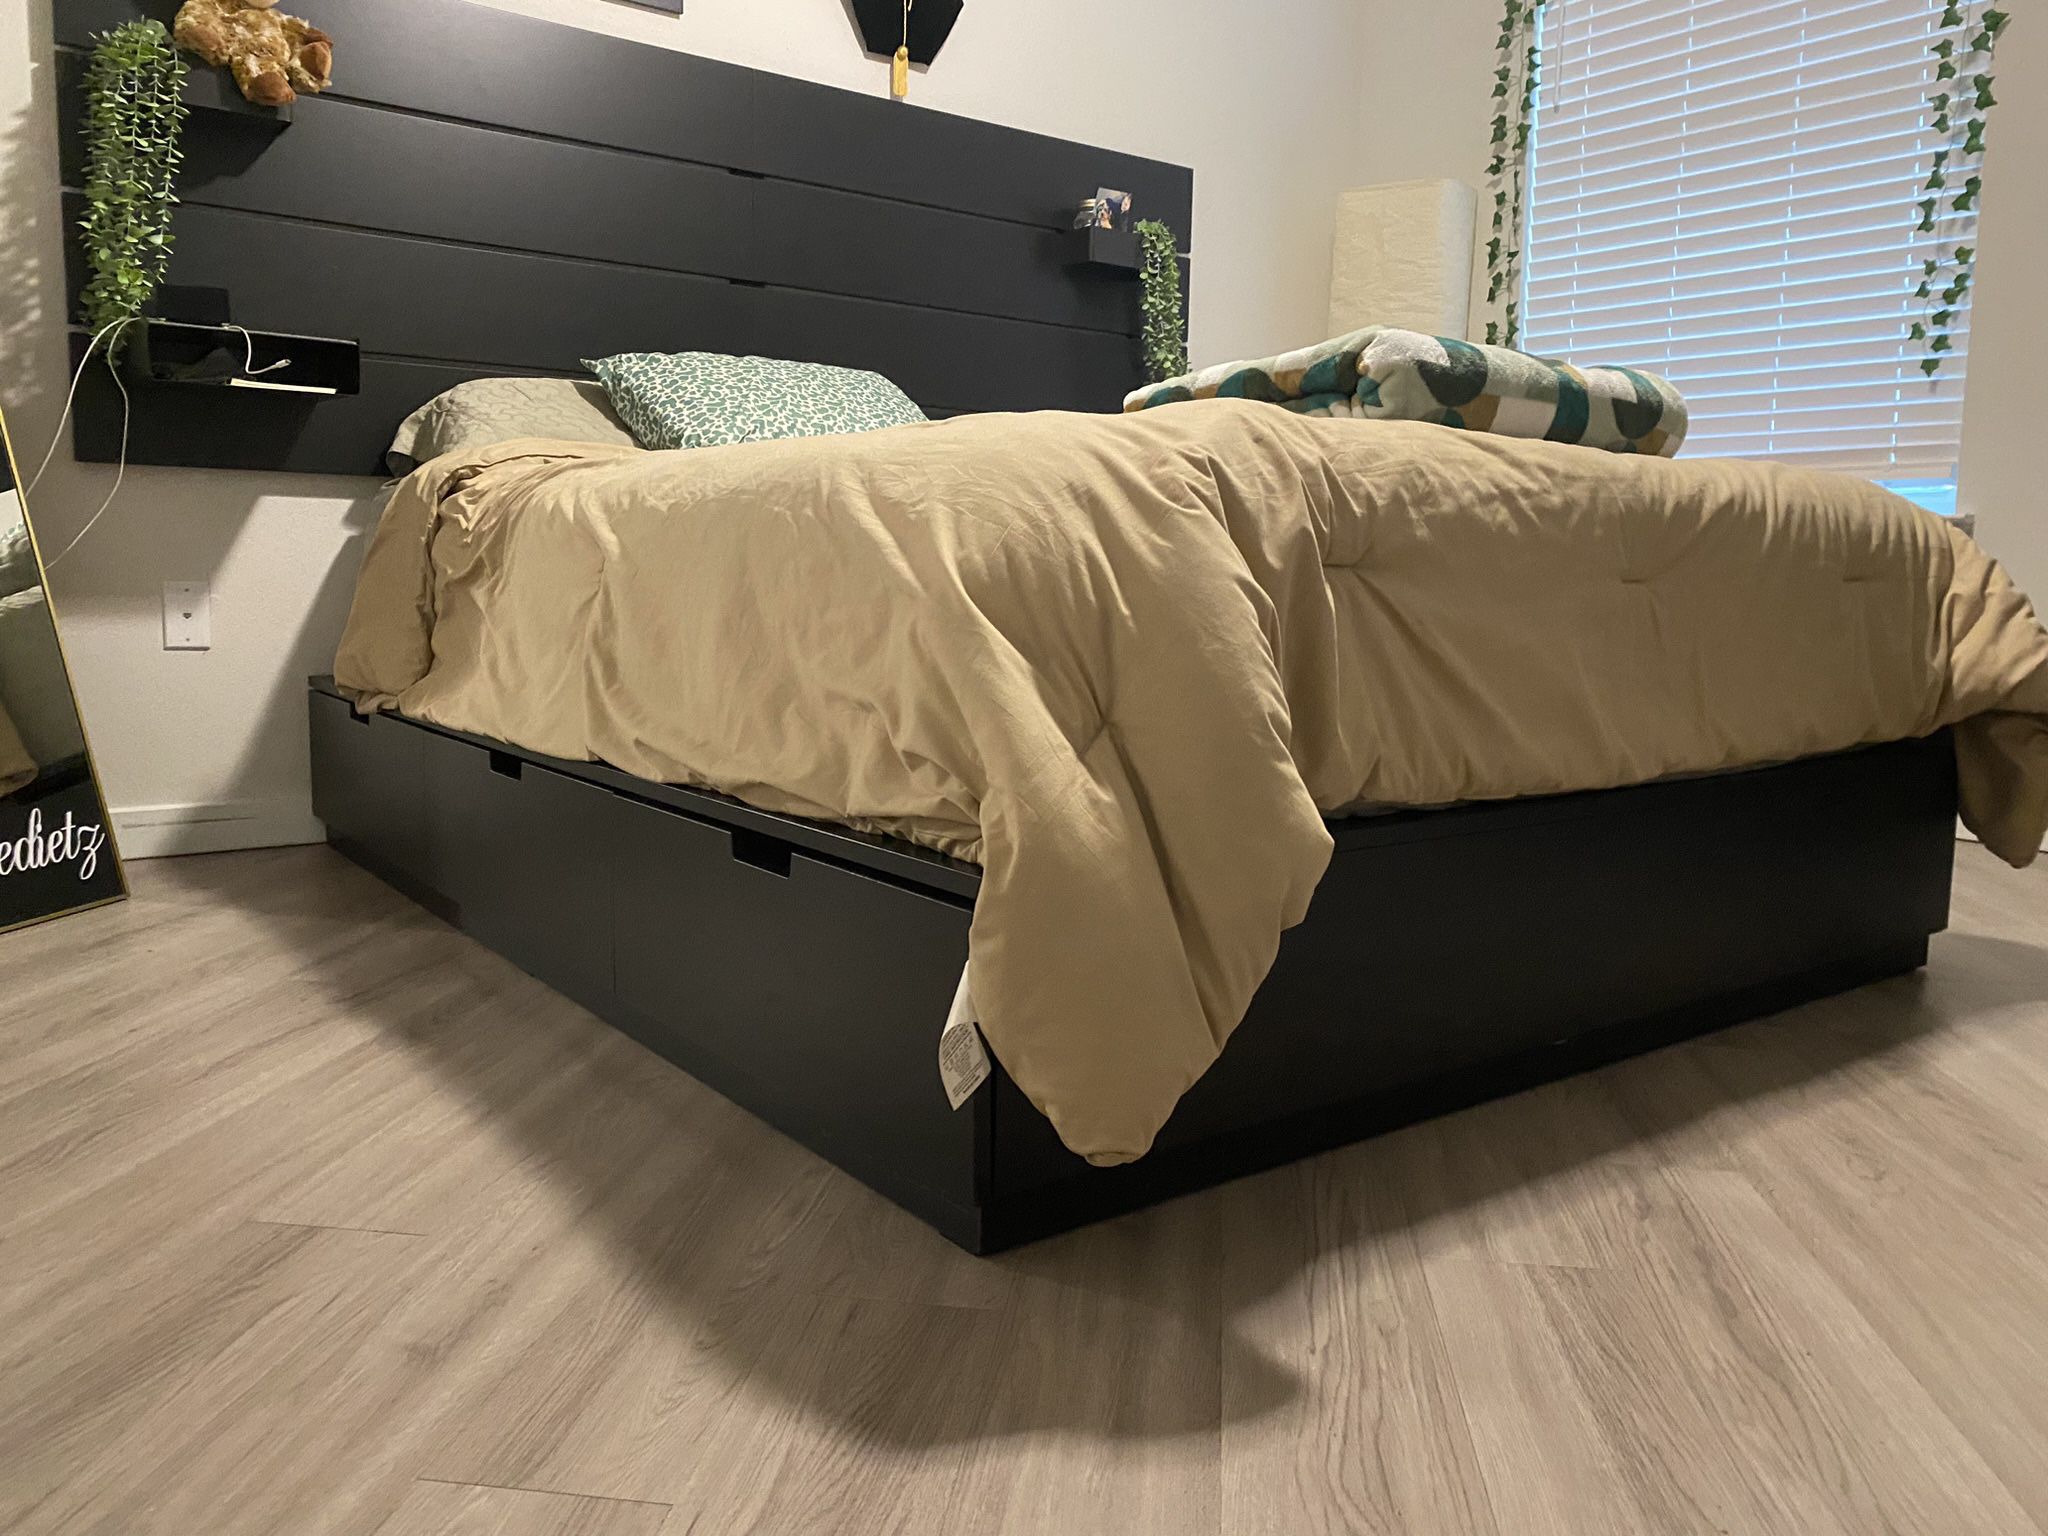 King Bed Frame and Head Board